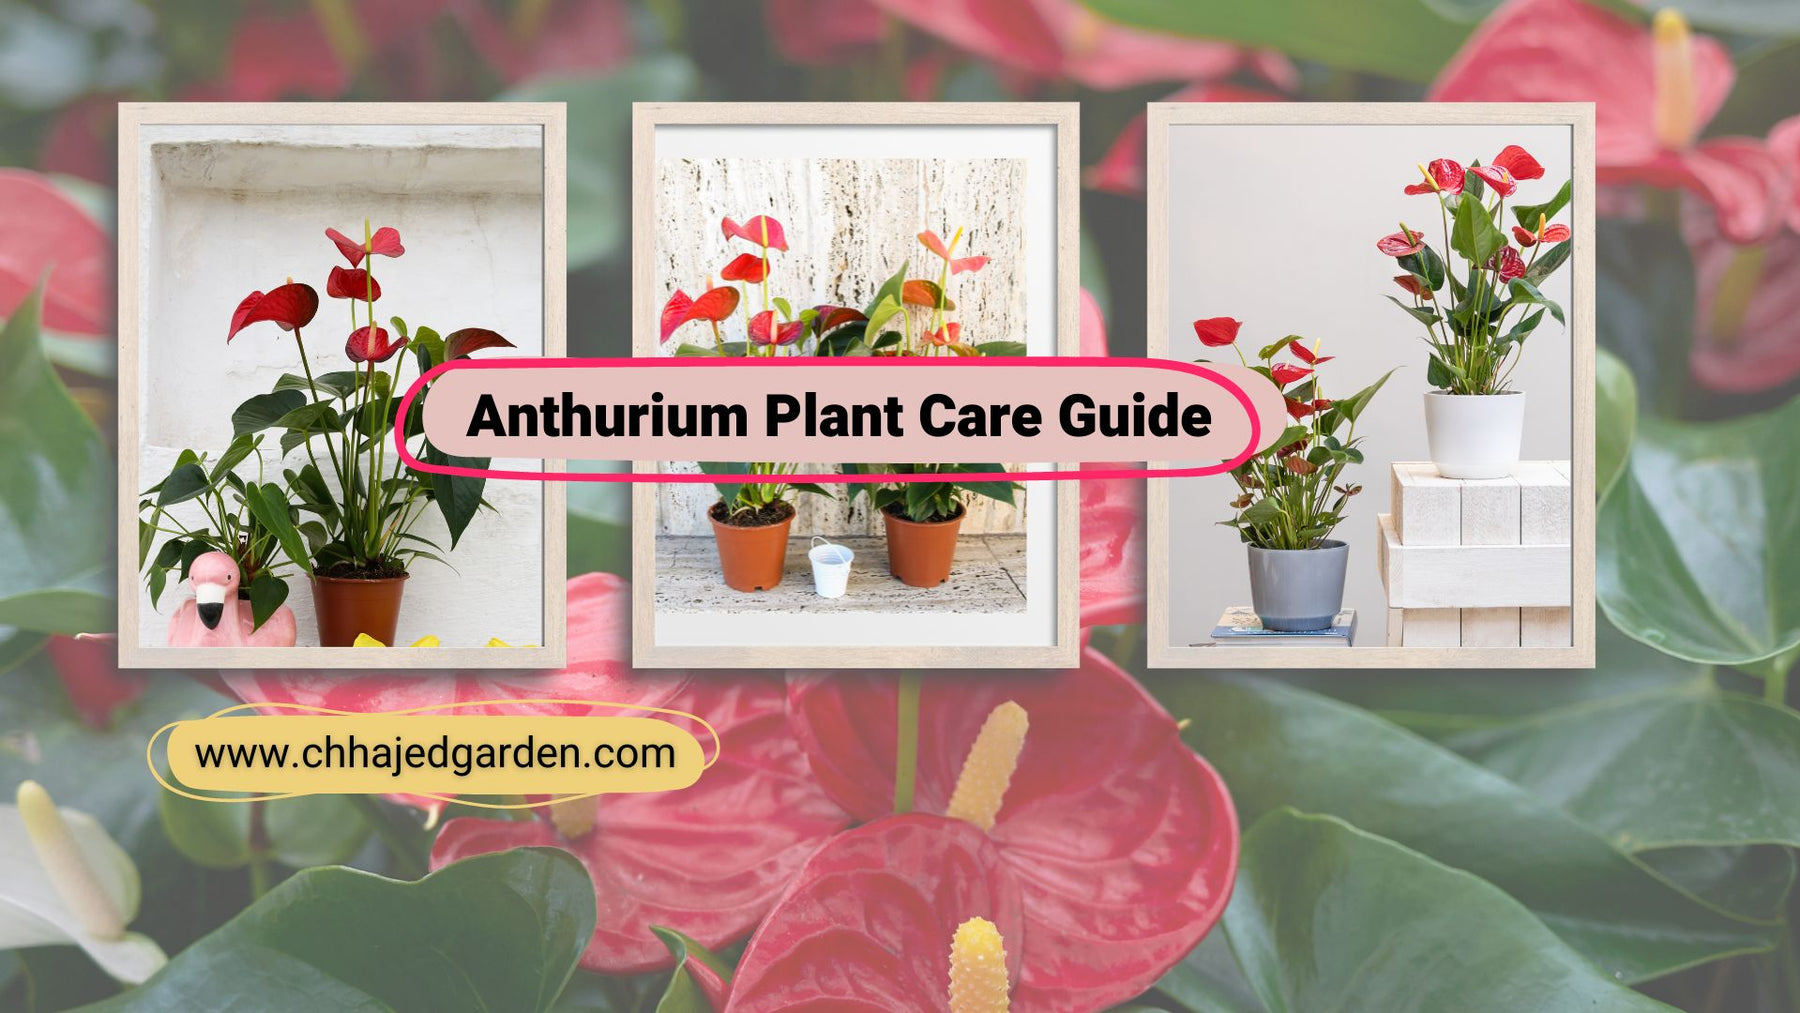 A Beginner's Guide to Growing and Caring for Anthurium Plants